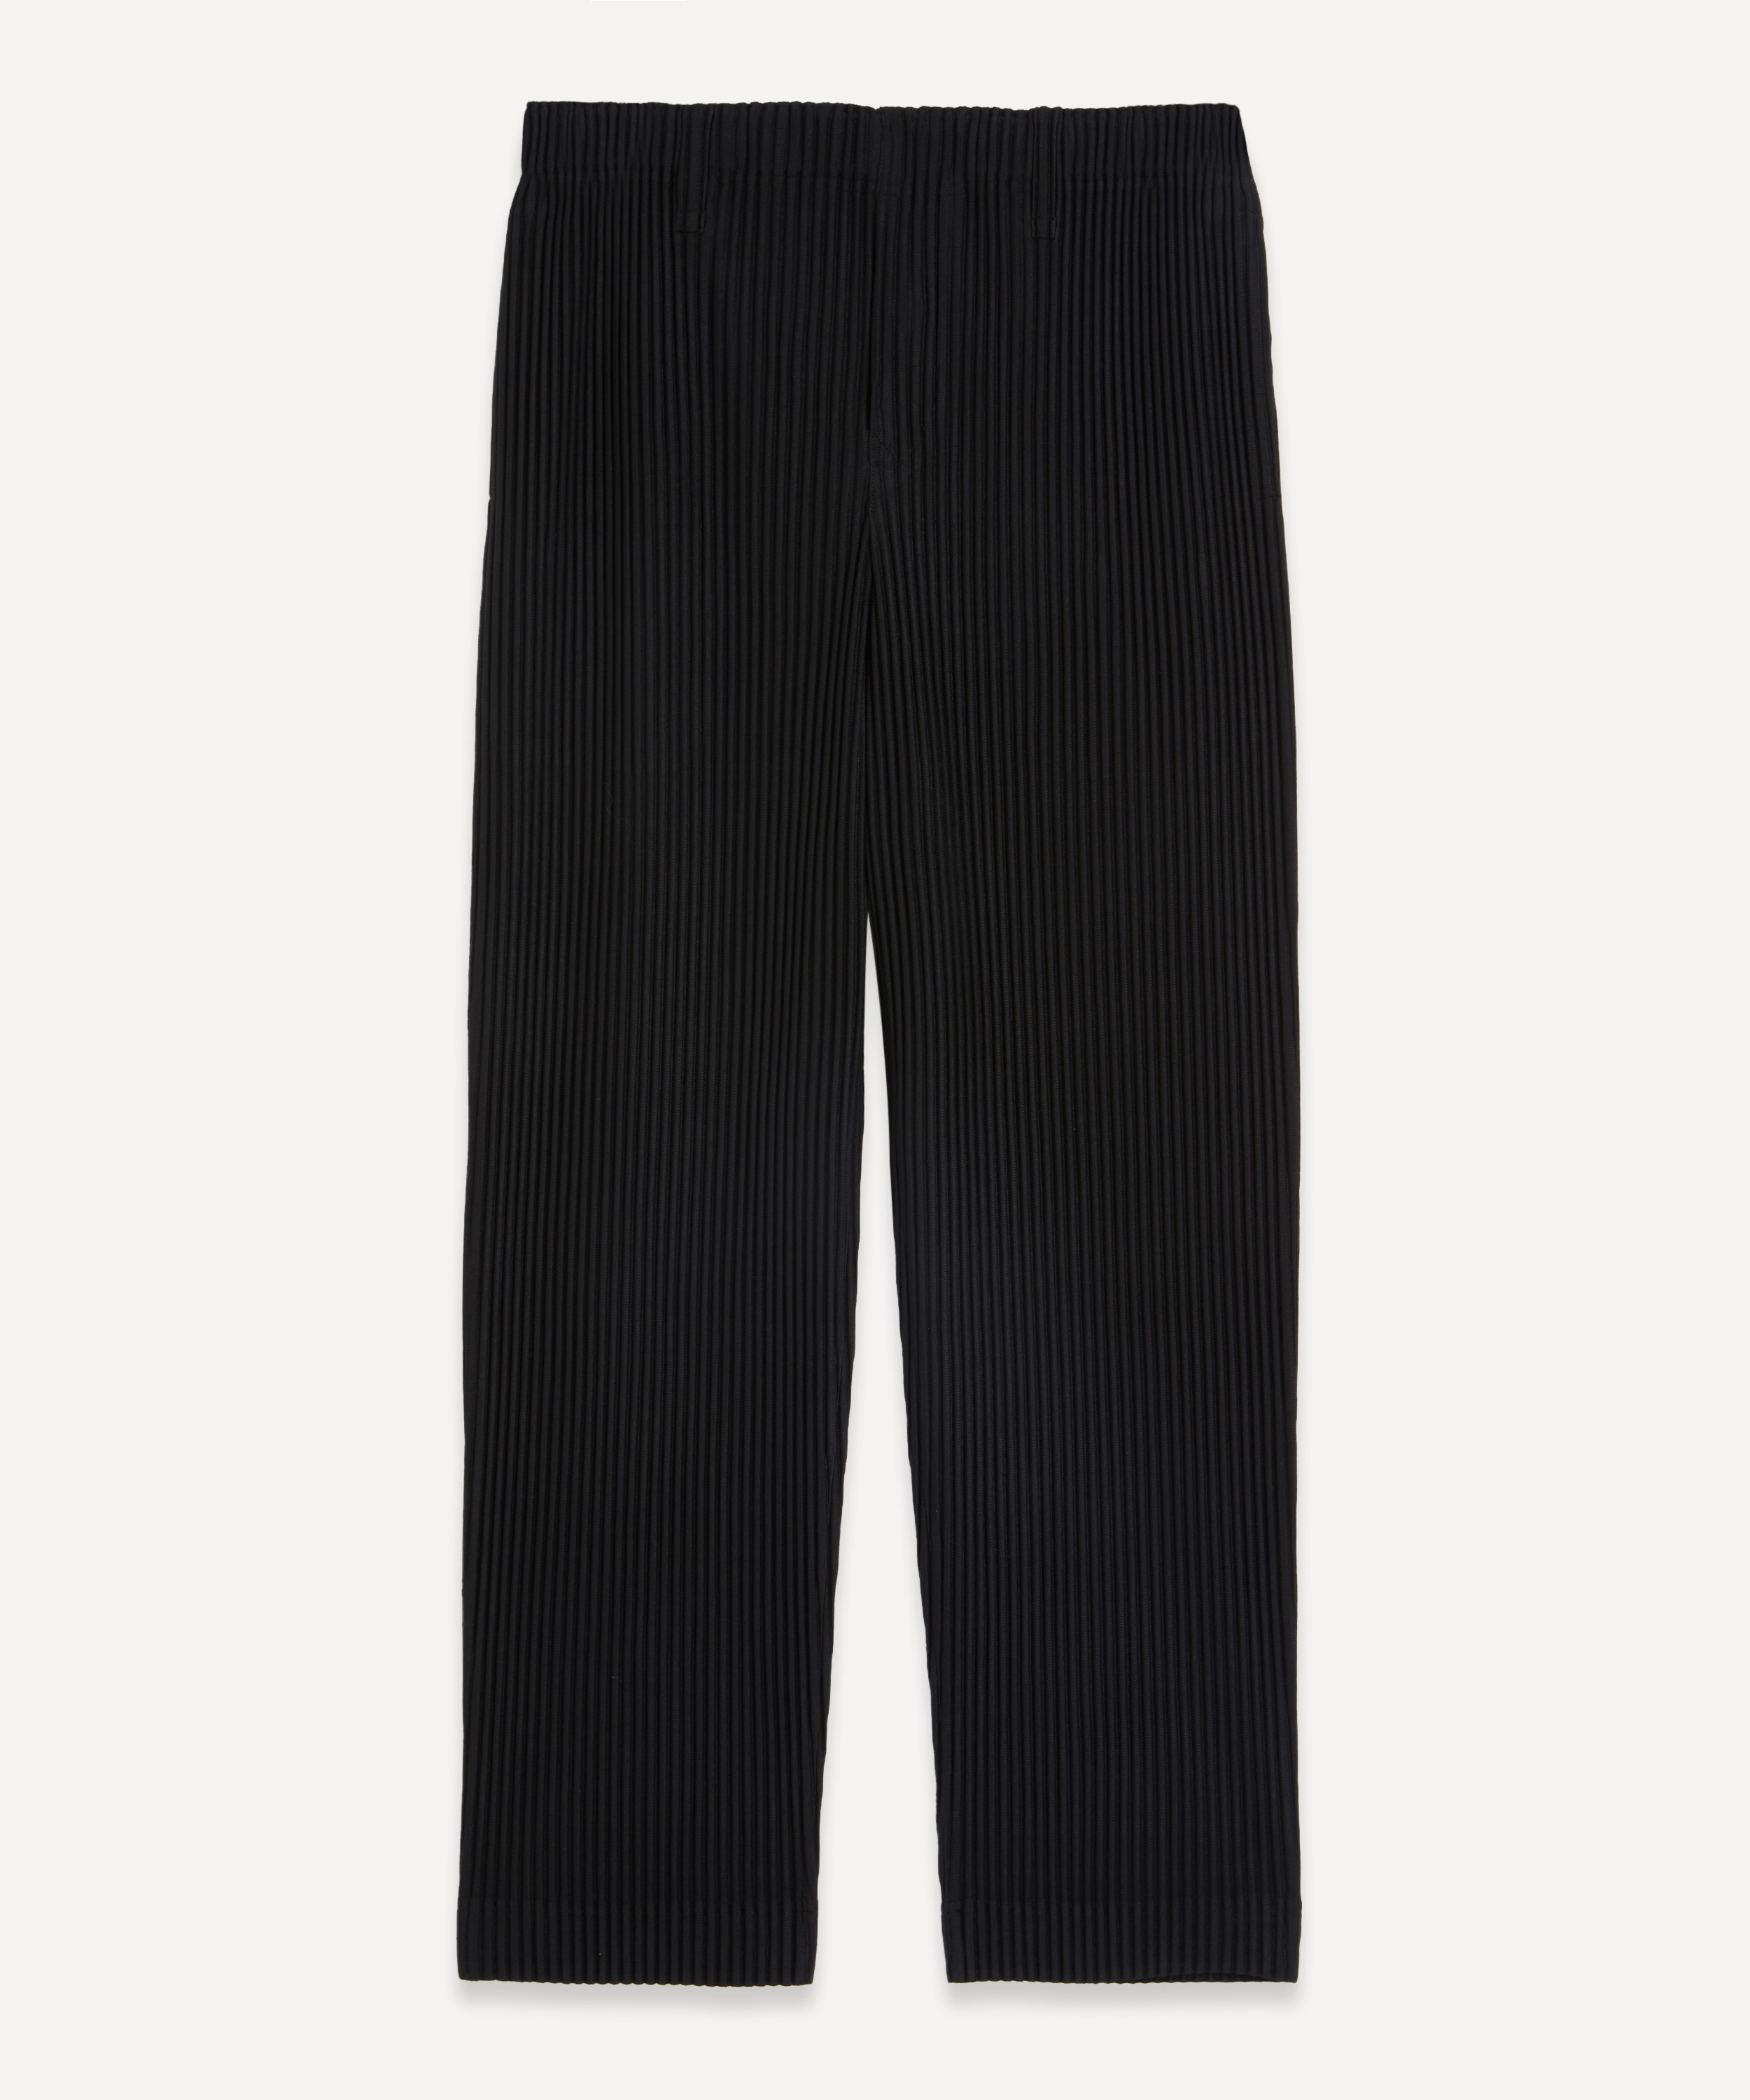 Homme Plisse Issey Miyake - Pleated Straight Leg Trousers